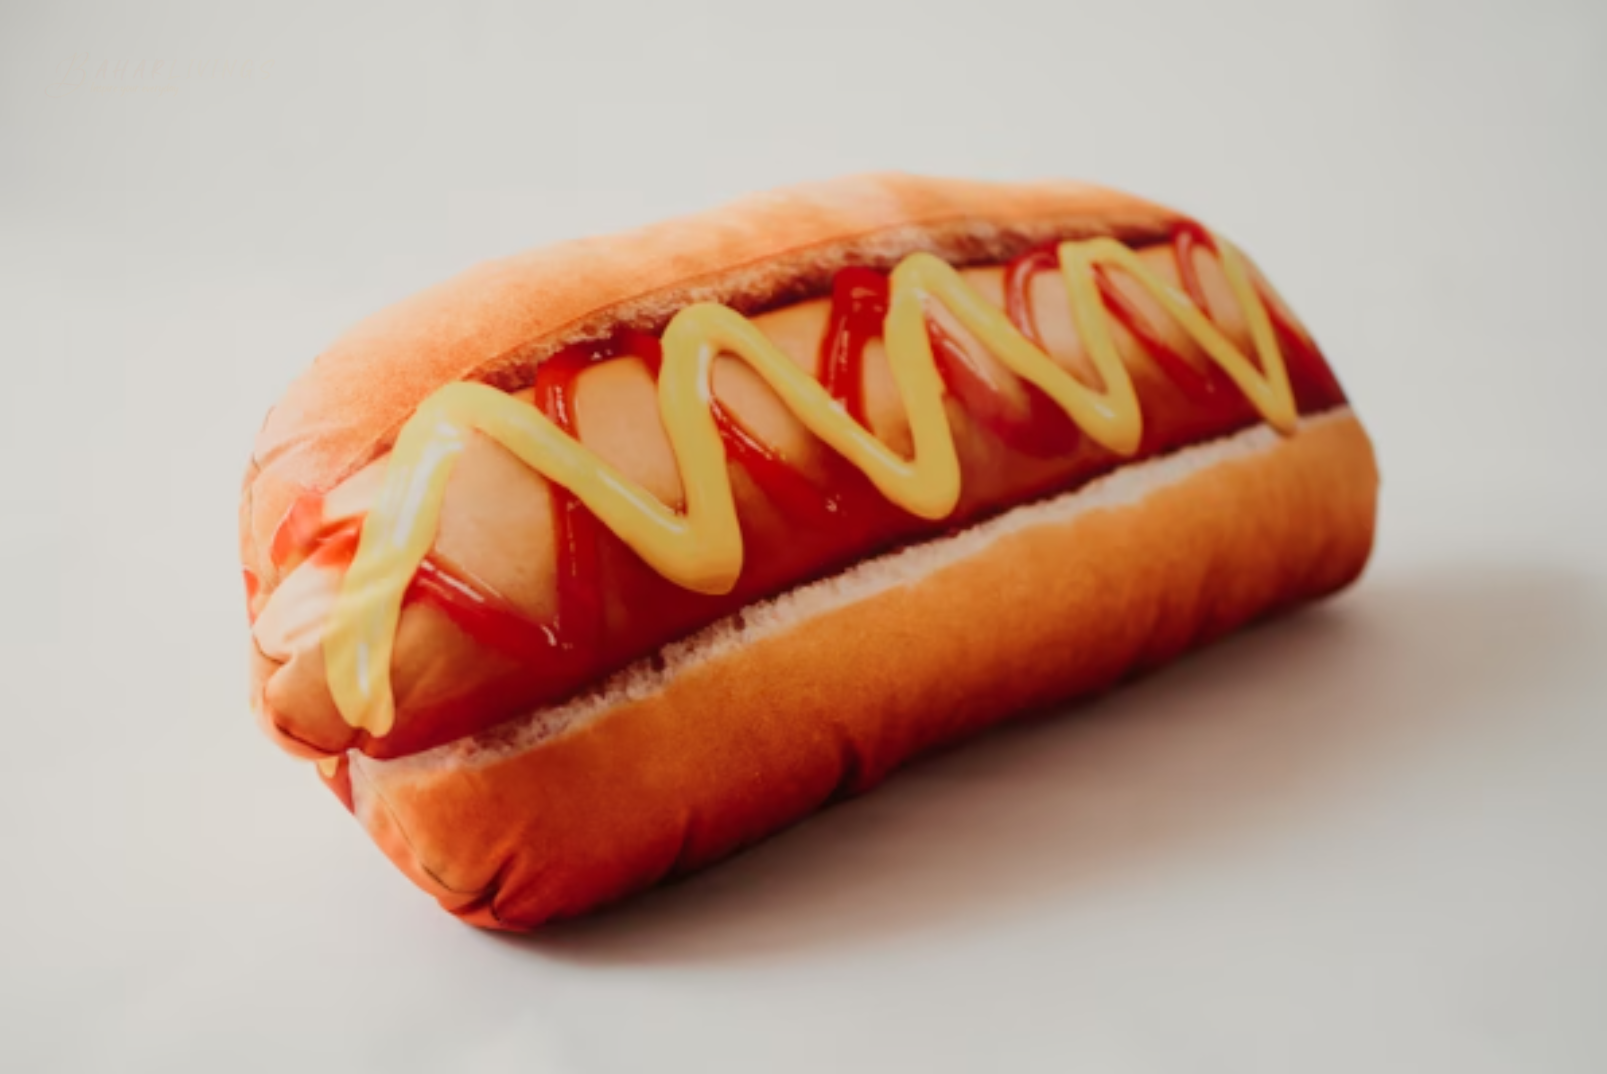 Fun gift for teens: Hot dog-shaped pillow, ideal for adding a quirky touch to their bedroom decor.